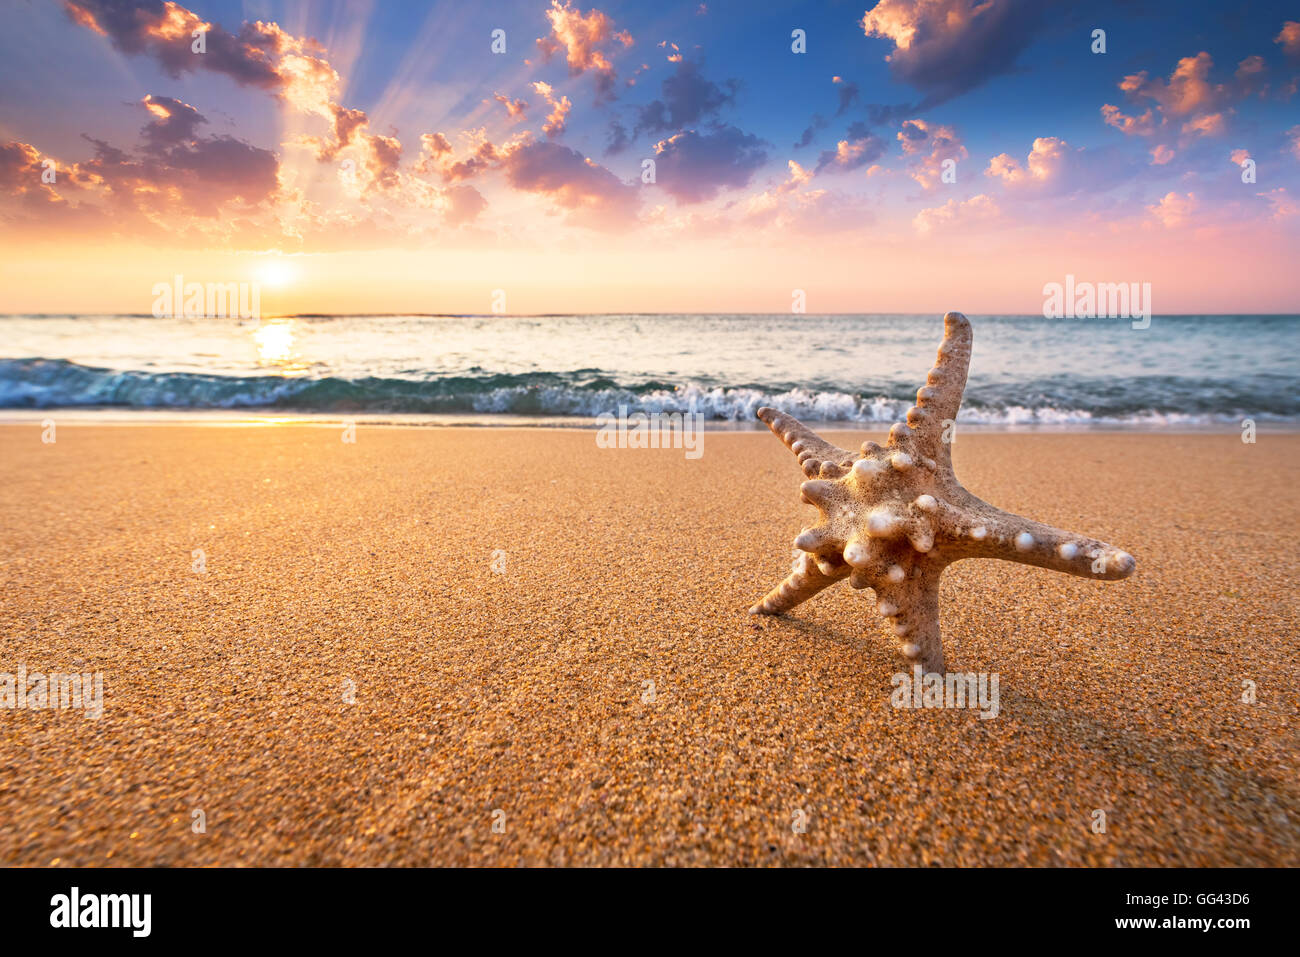 Tropical beach background with starfish. Stock Photo